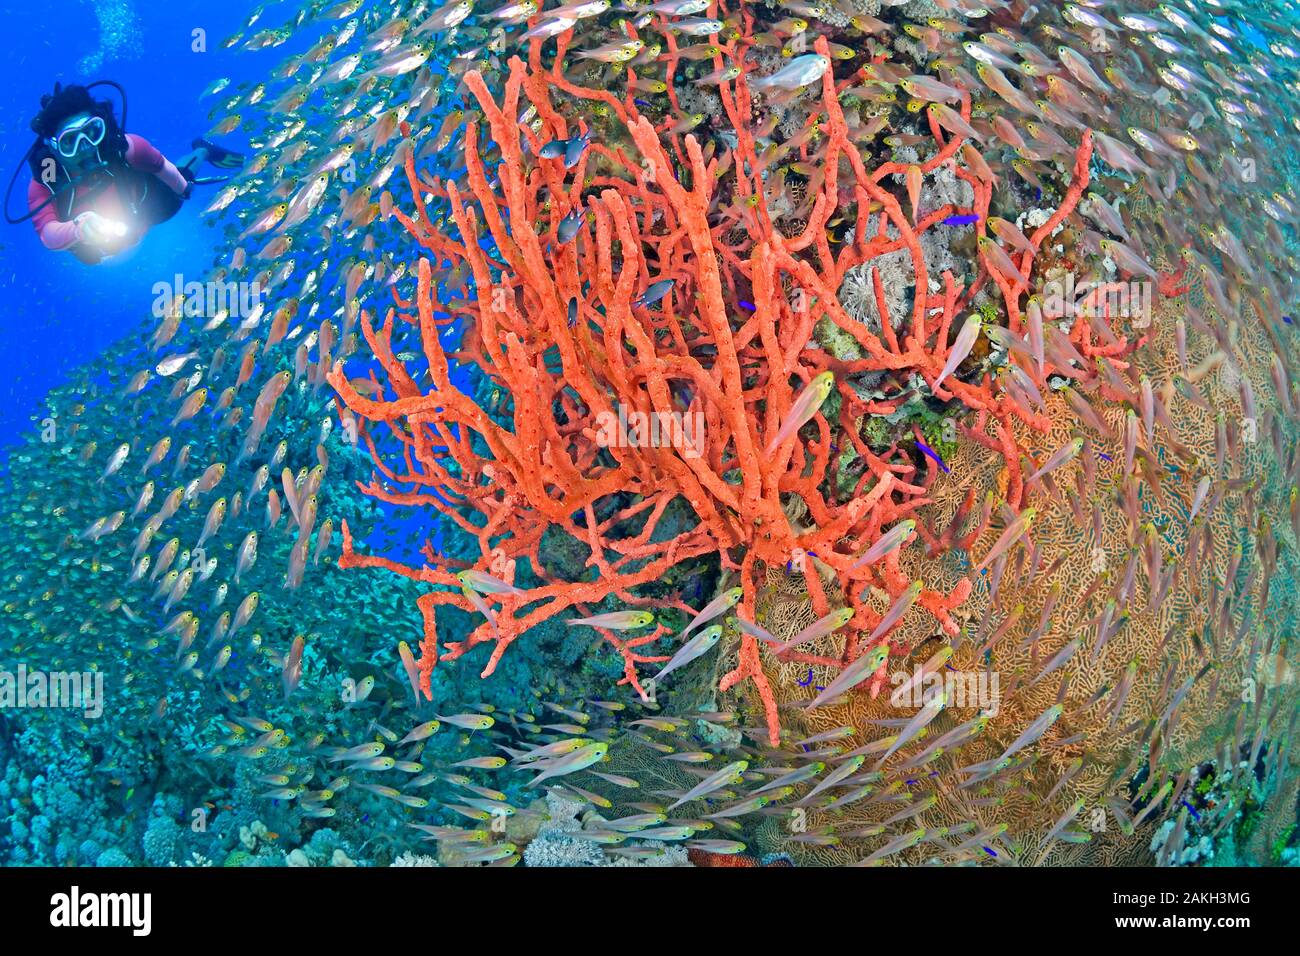 Egypte, Red Sea, glass-fish (Parapriacanthus guentheri) and red bushy sponges Stock Photo